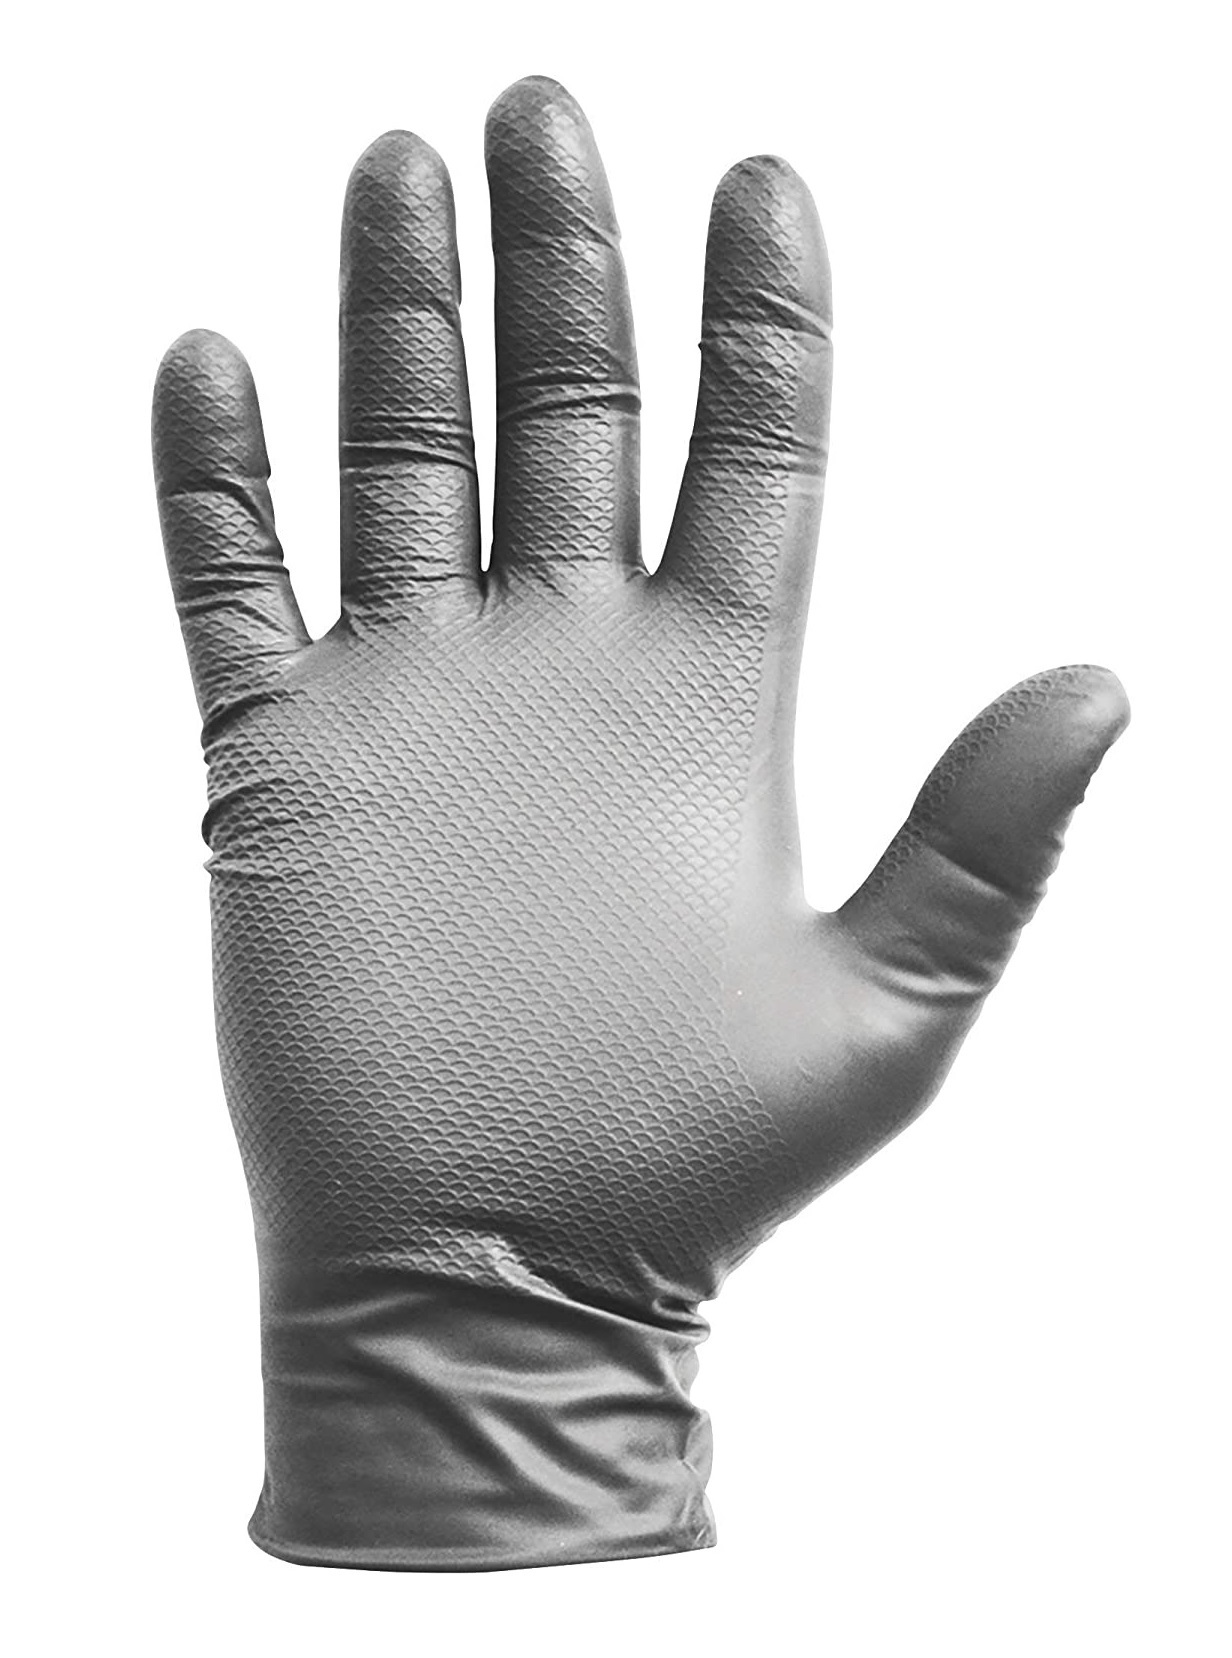 Traction Grip Disposable Nitrile - 100 Pack - Grease Monkey Gloves